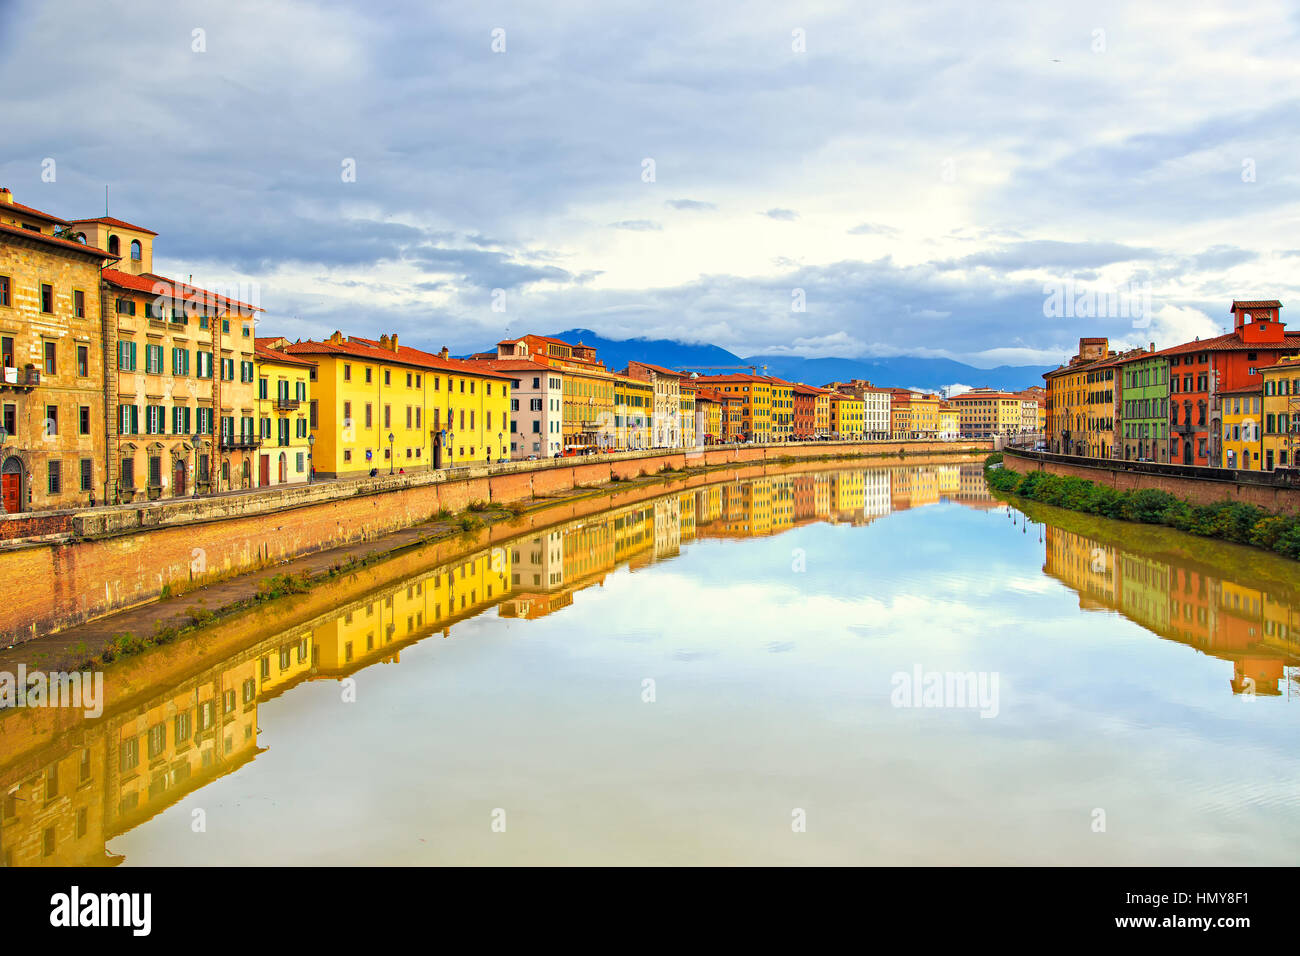 Pisa, Arno river and building facades reflection. Lungarno view. Tuscany, Italy, Europe. Stock Photo